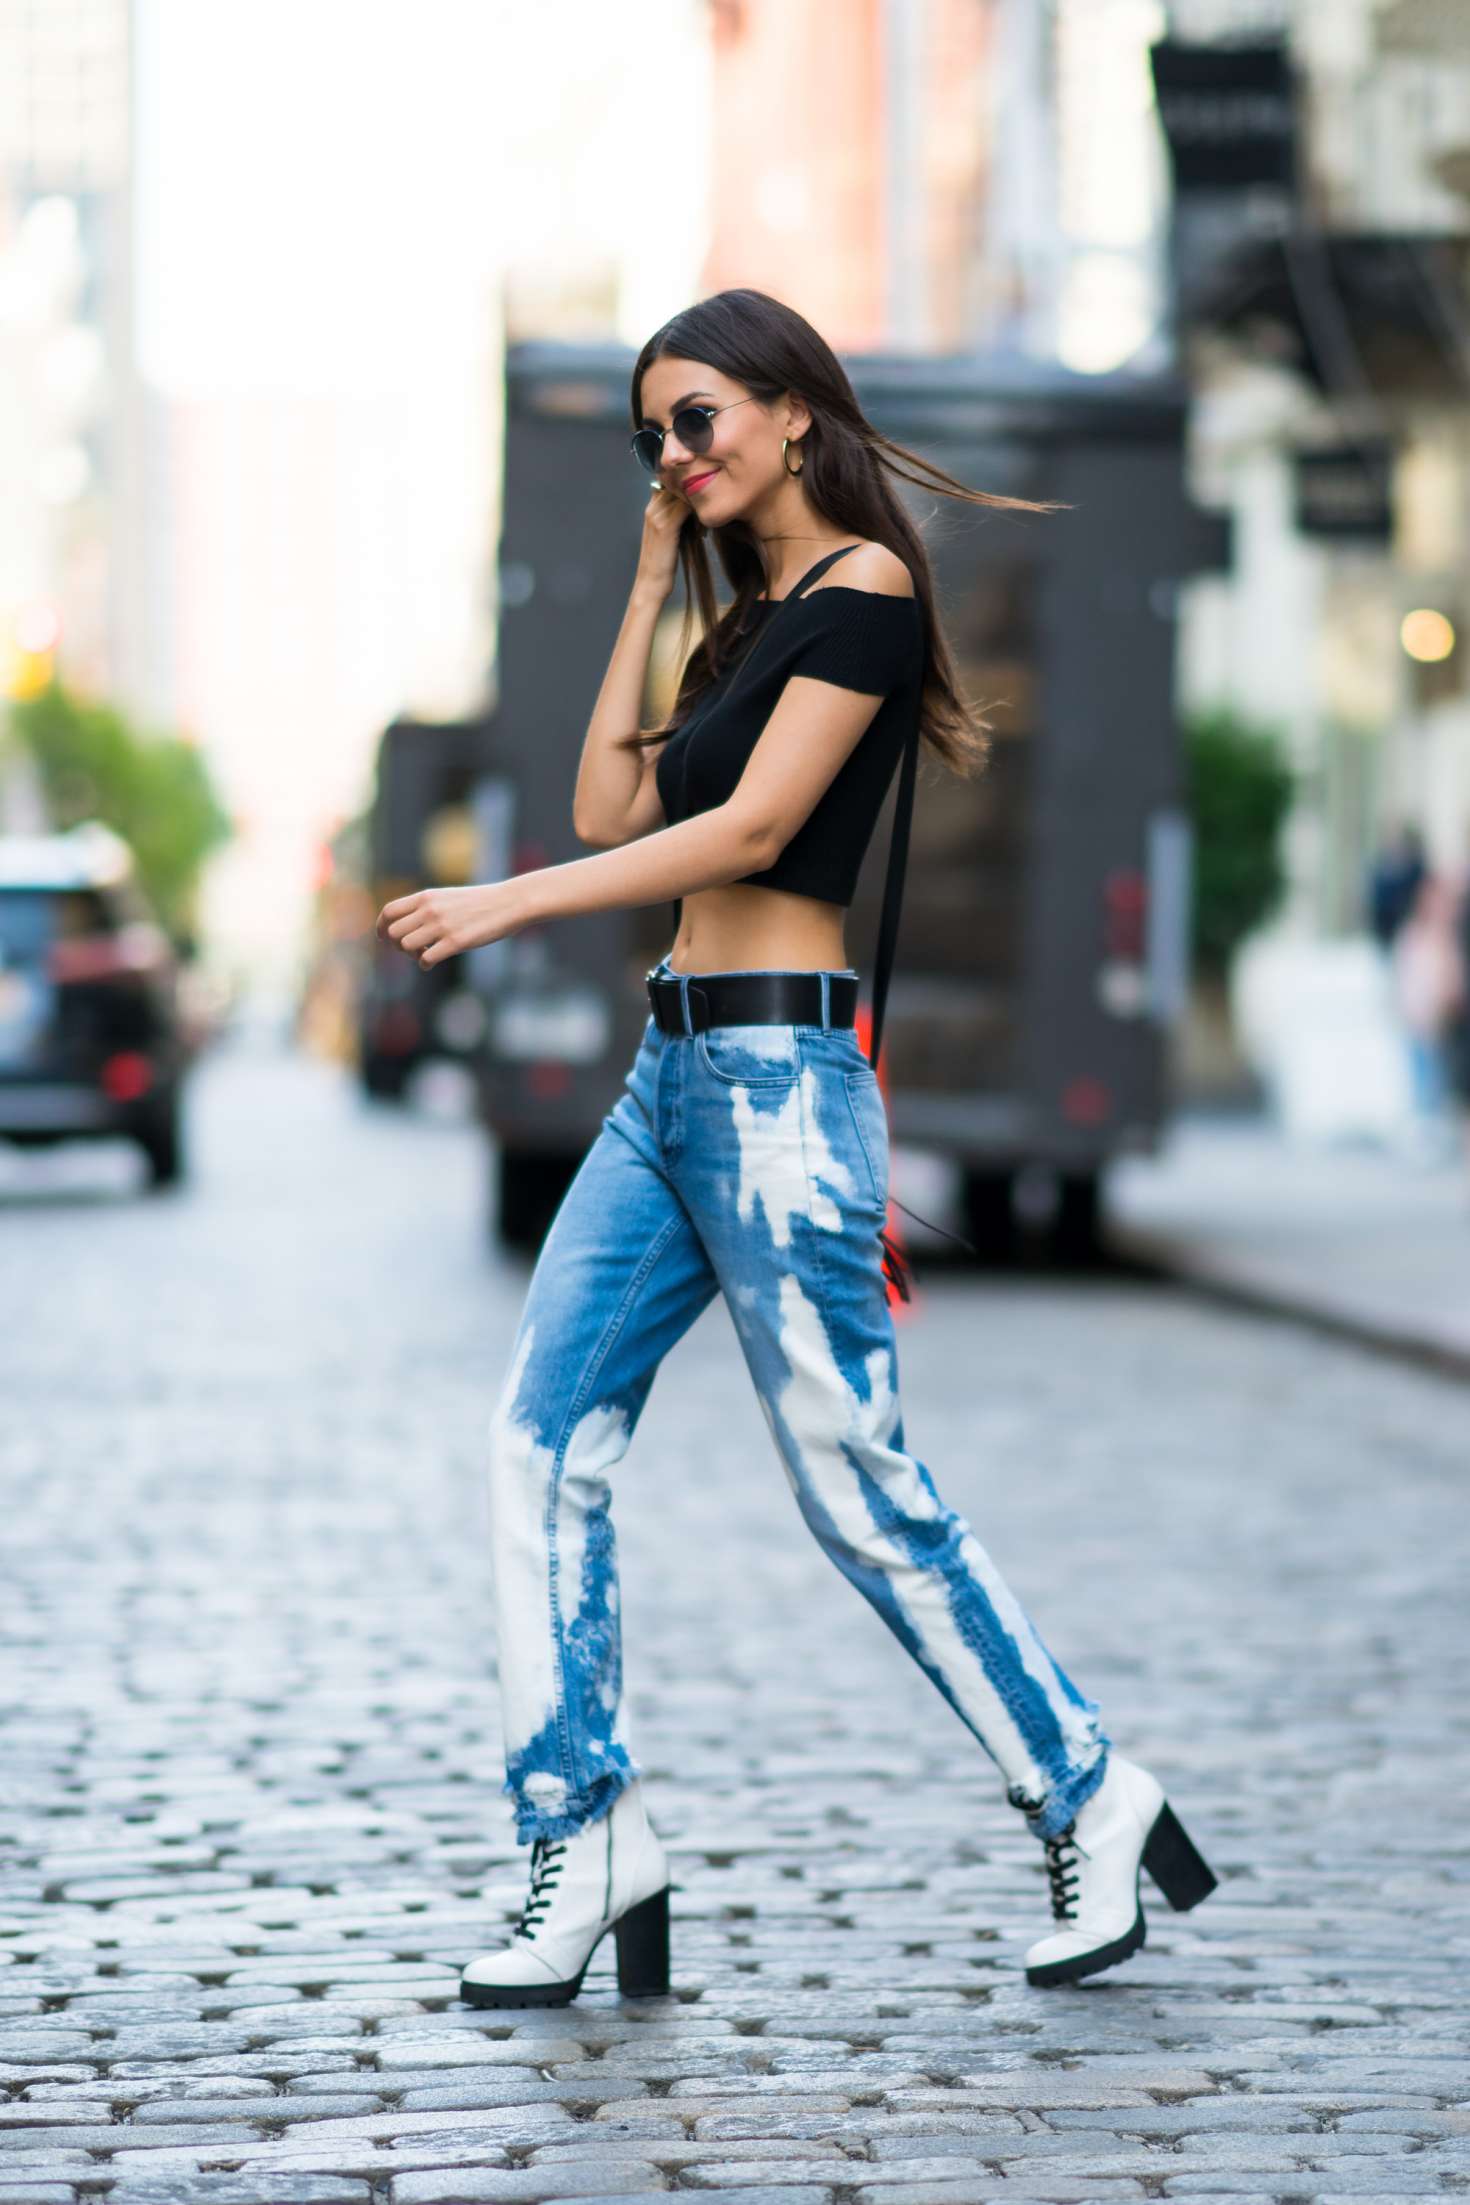 Victoria Justice in Jeans and Black Crop Top -19 | GotCeleb